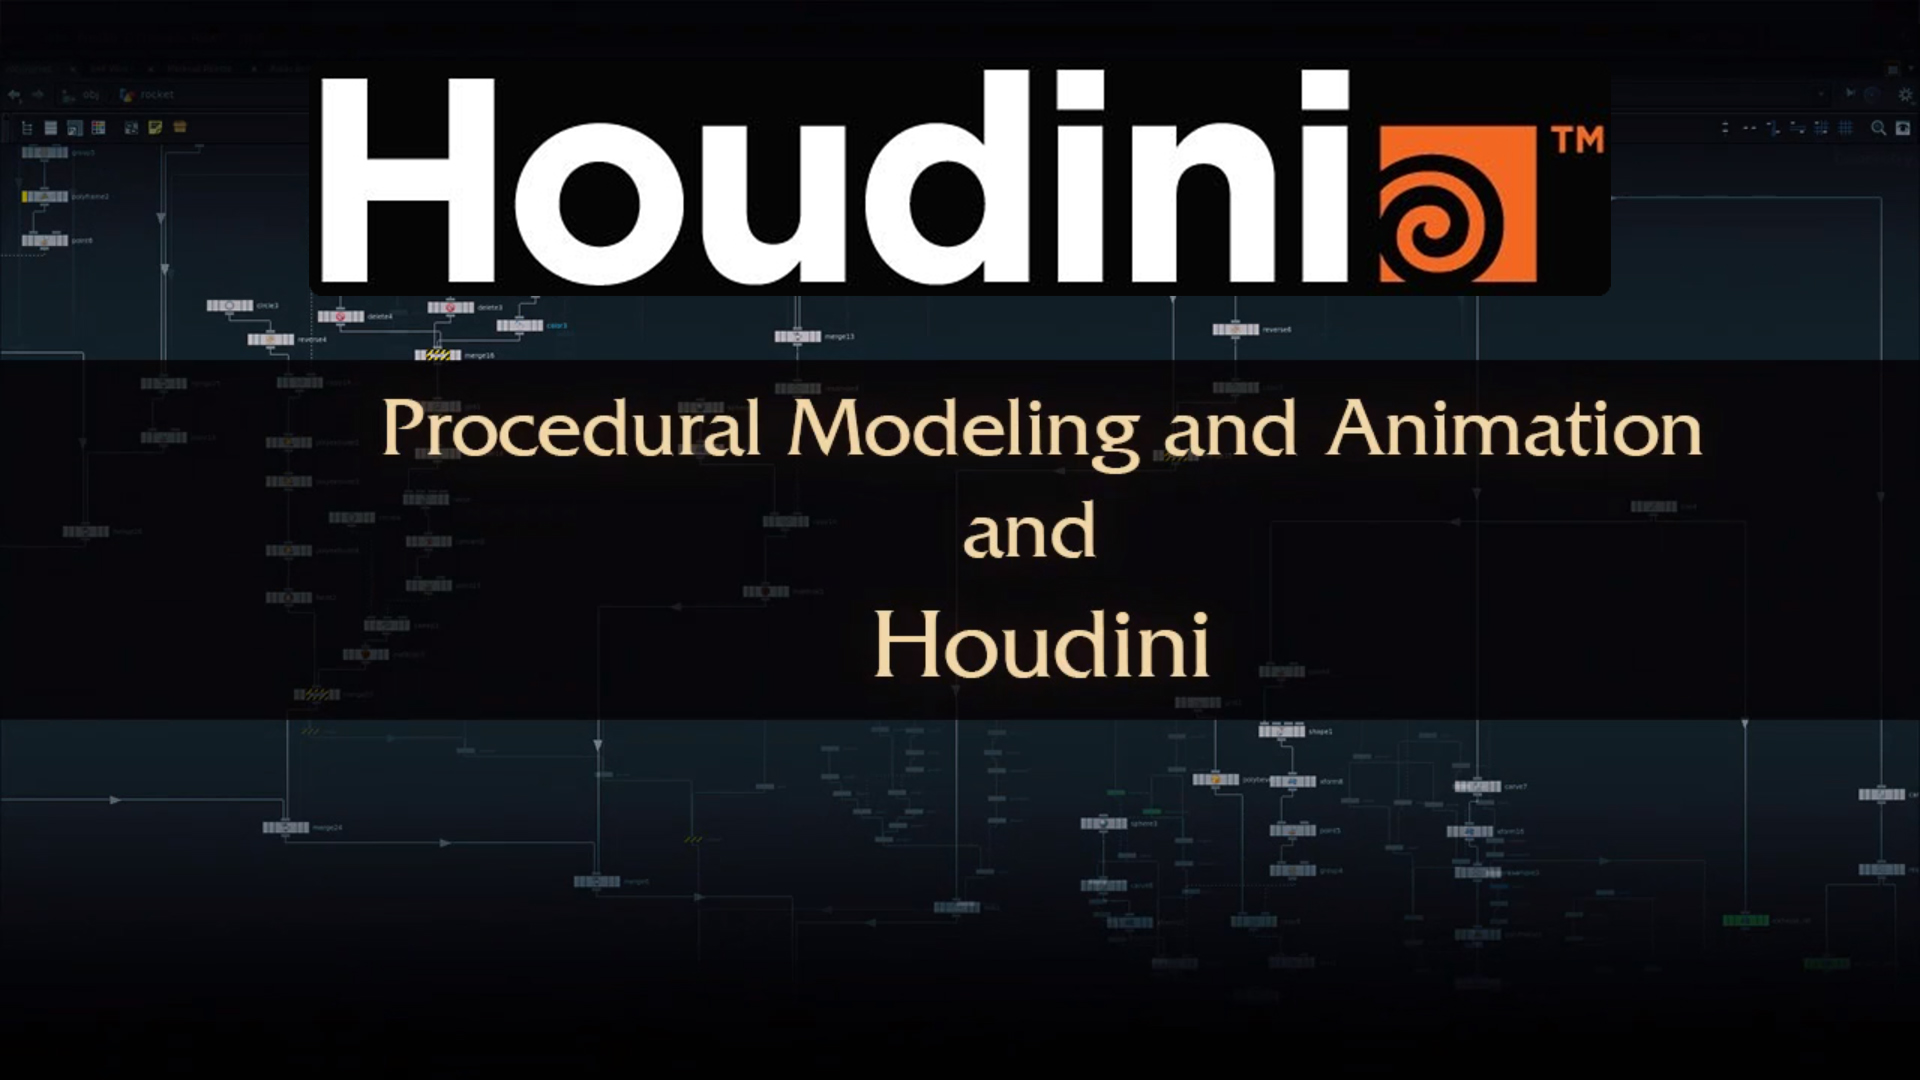 what is procedural modelling? by Rohan Dalvi